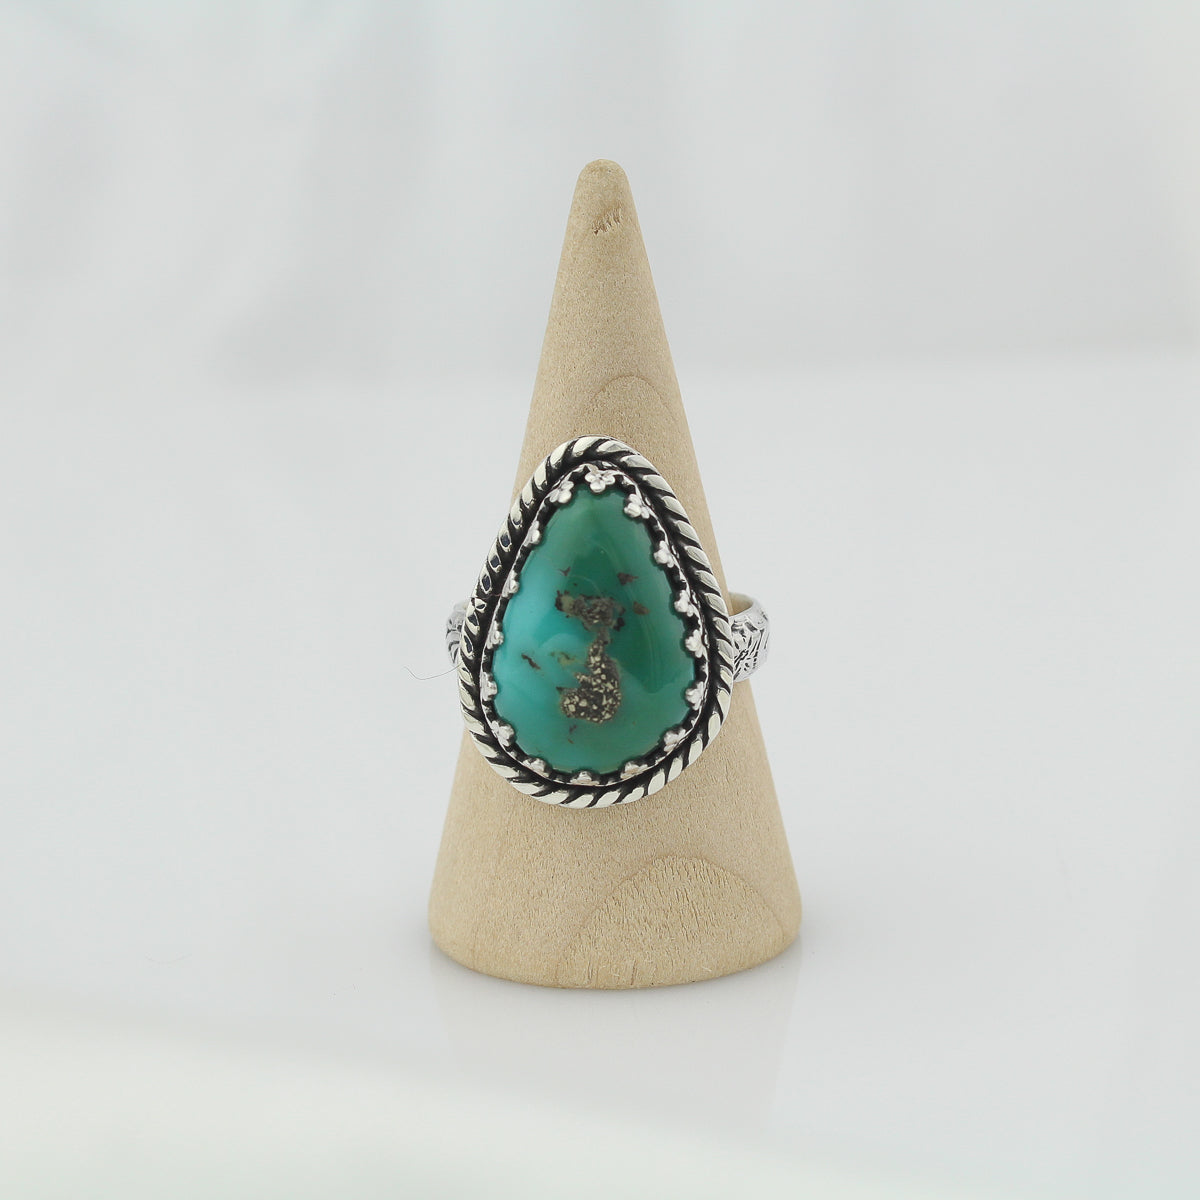 Kingman Turquoise with Pyrite Ring - Size 7.5